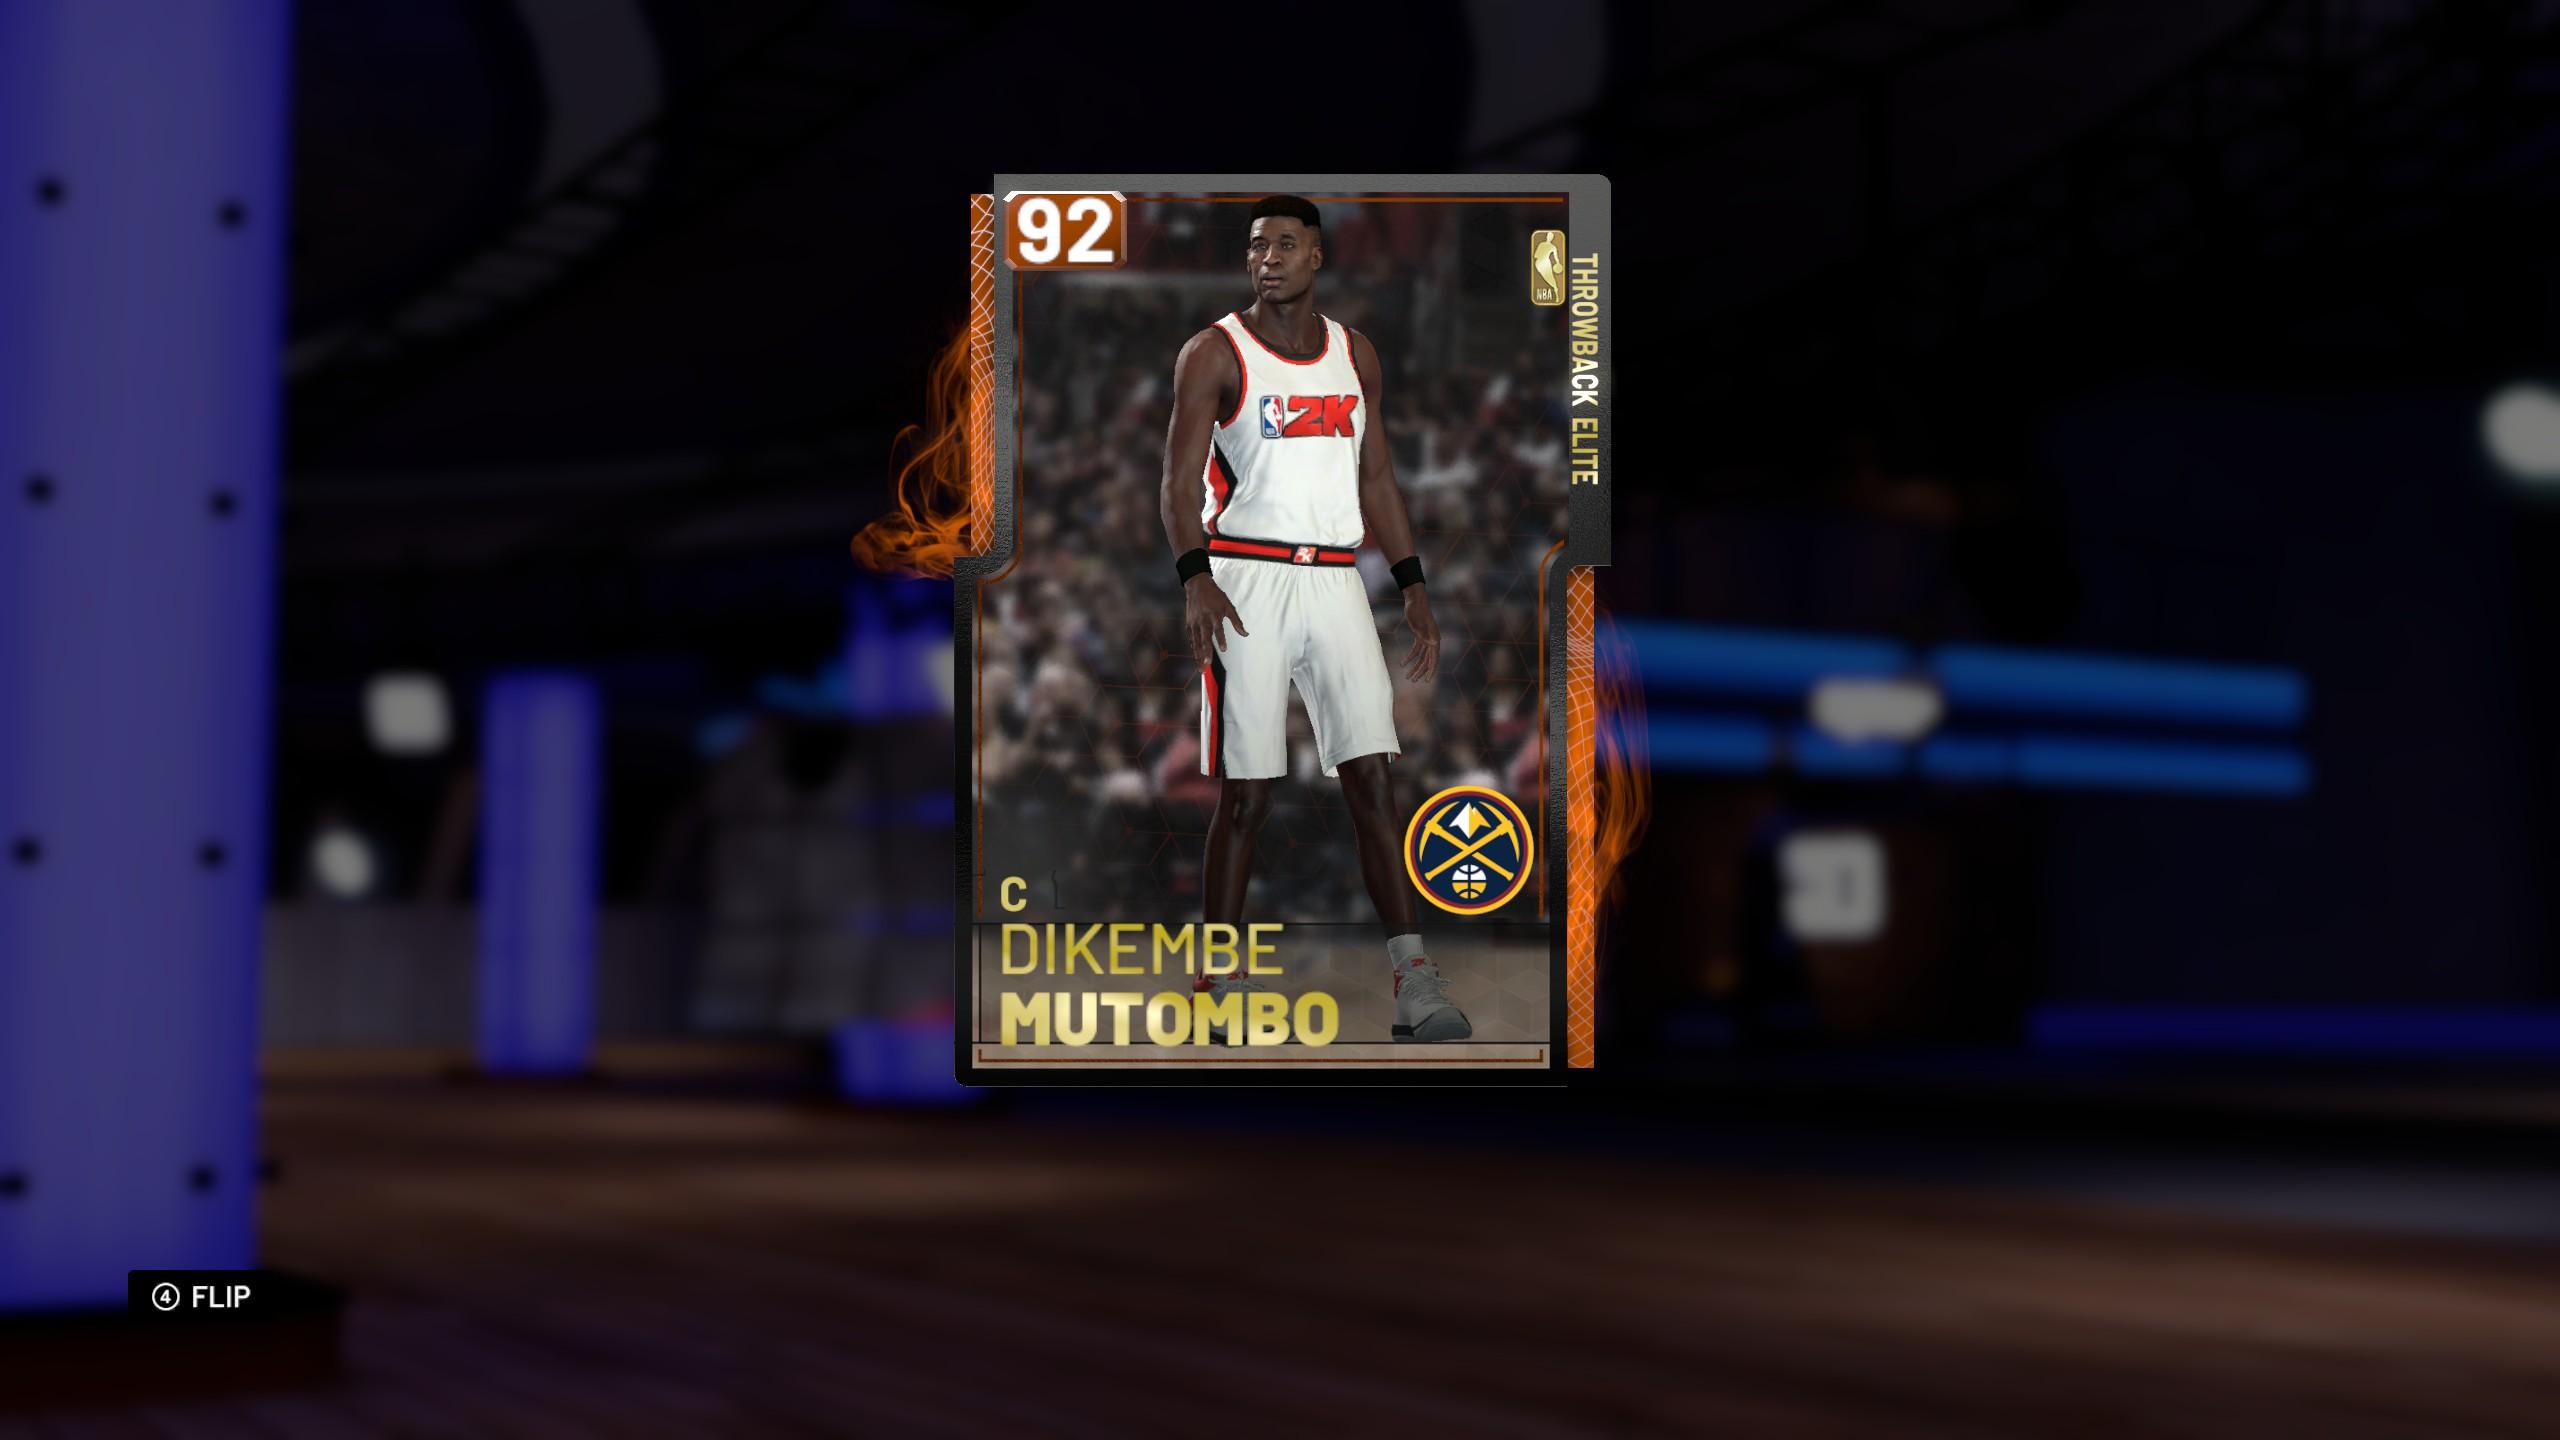 I pulled amy Dikembe Mutombo from throwback packs, I can't find him